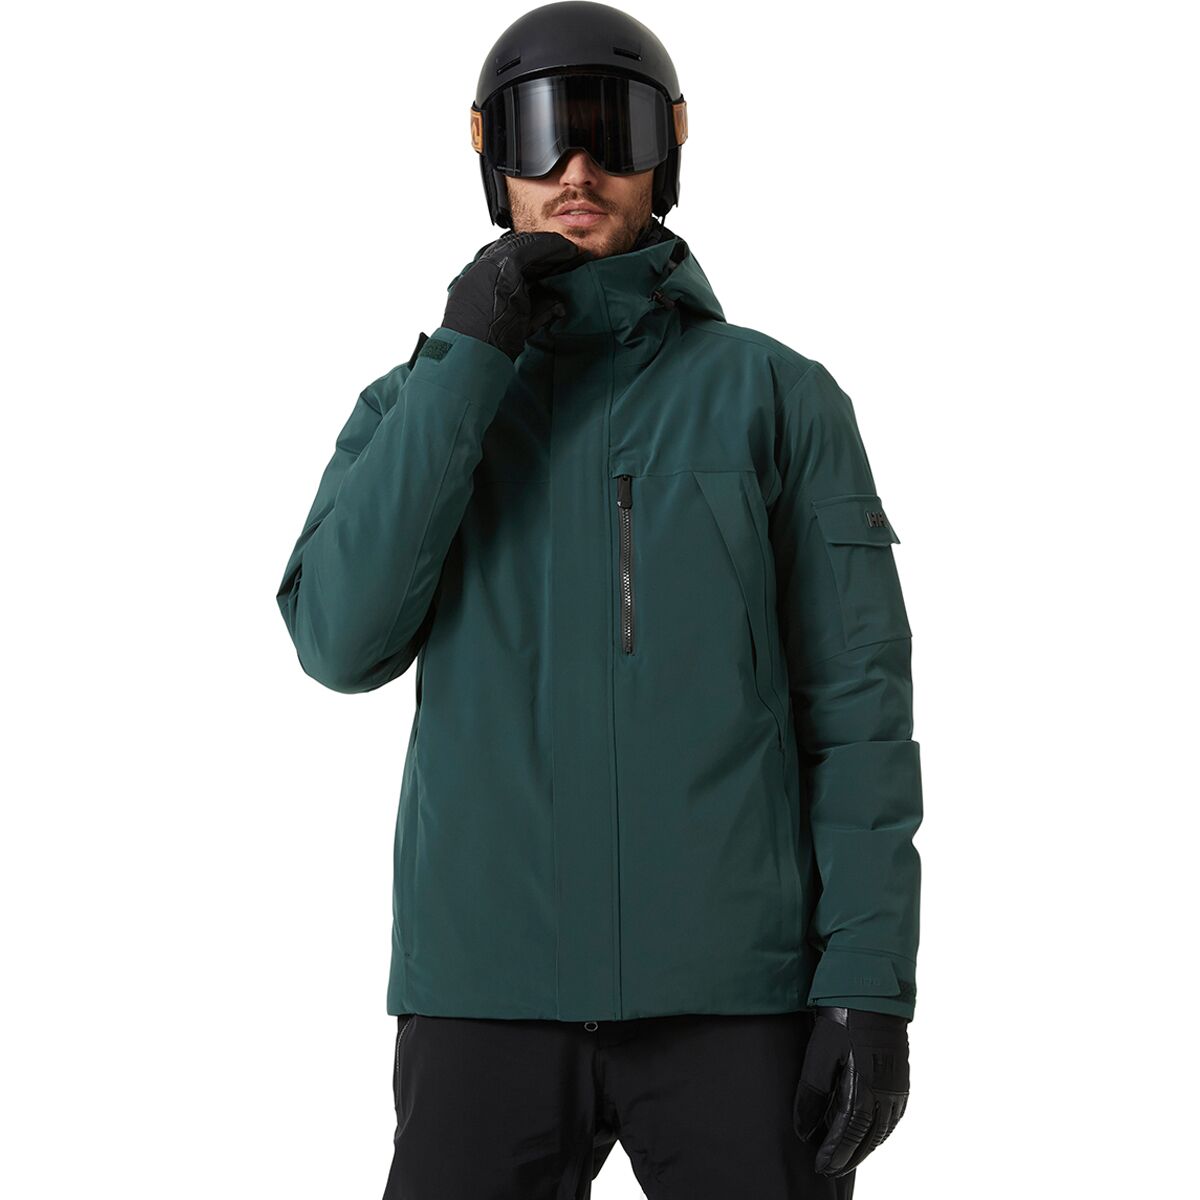 Val D Isere Puffy Jacket - Men